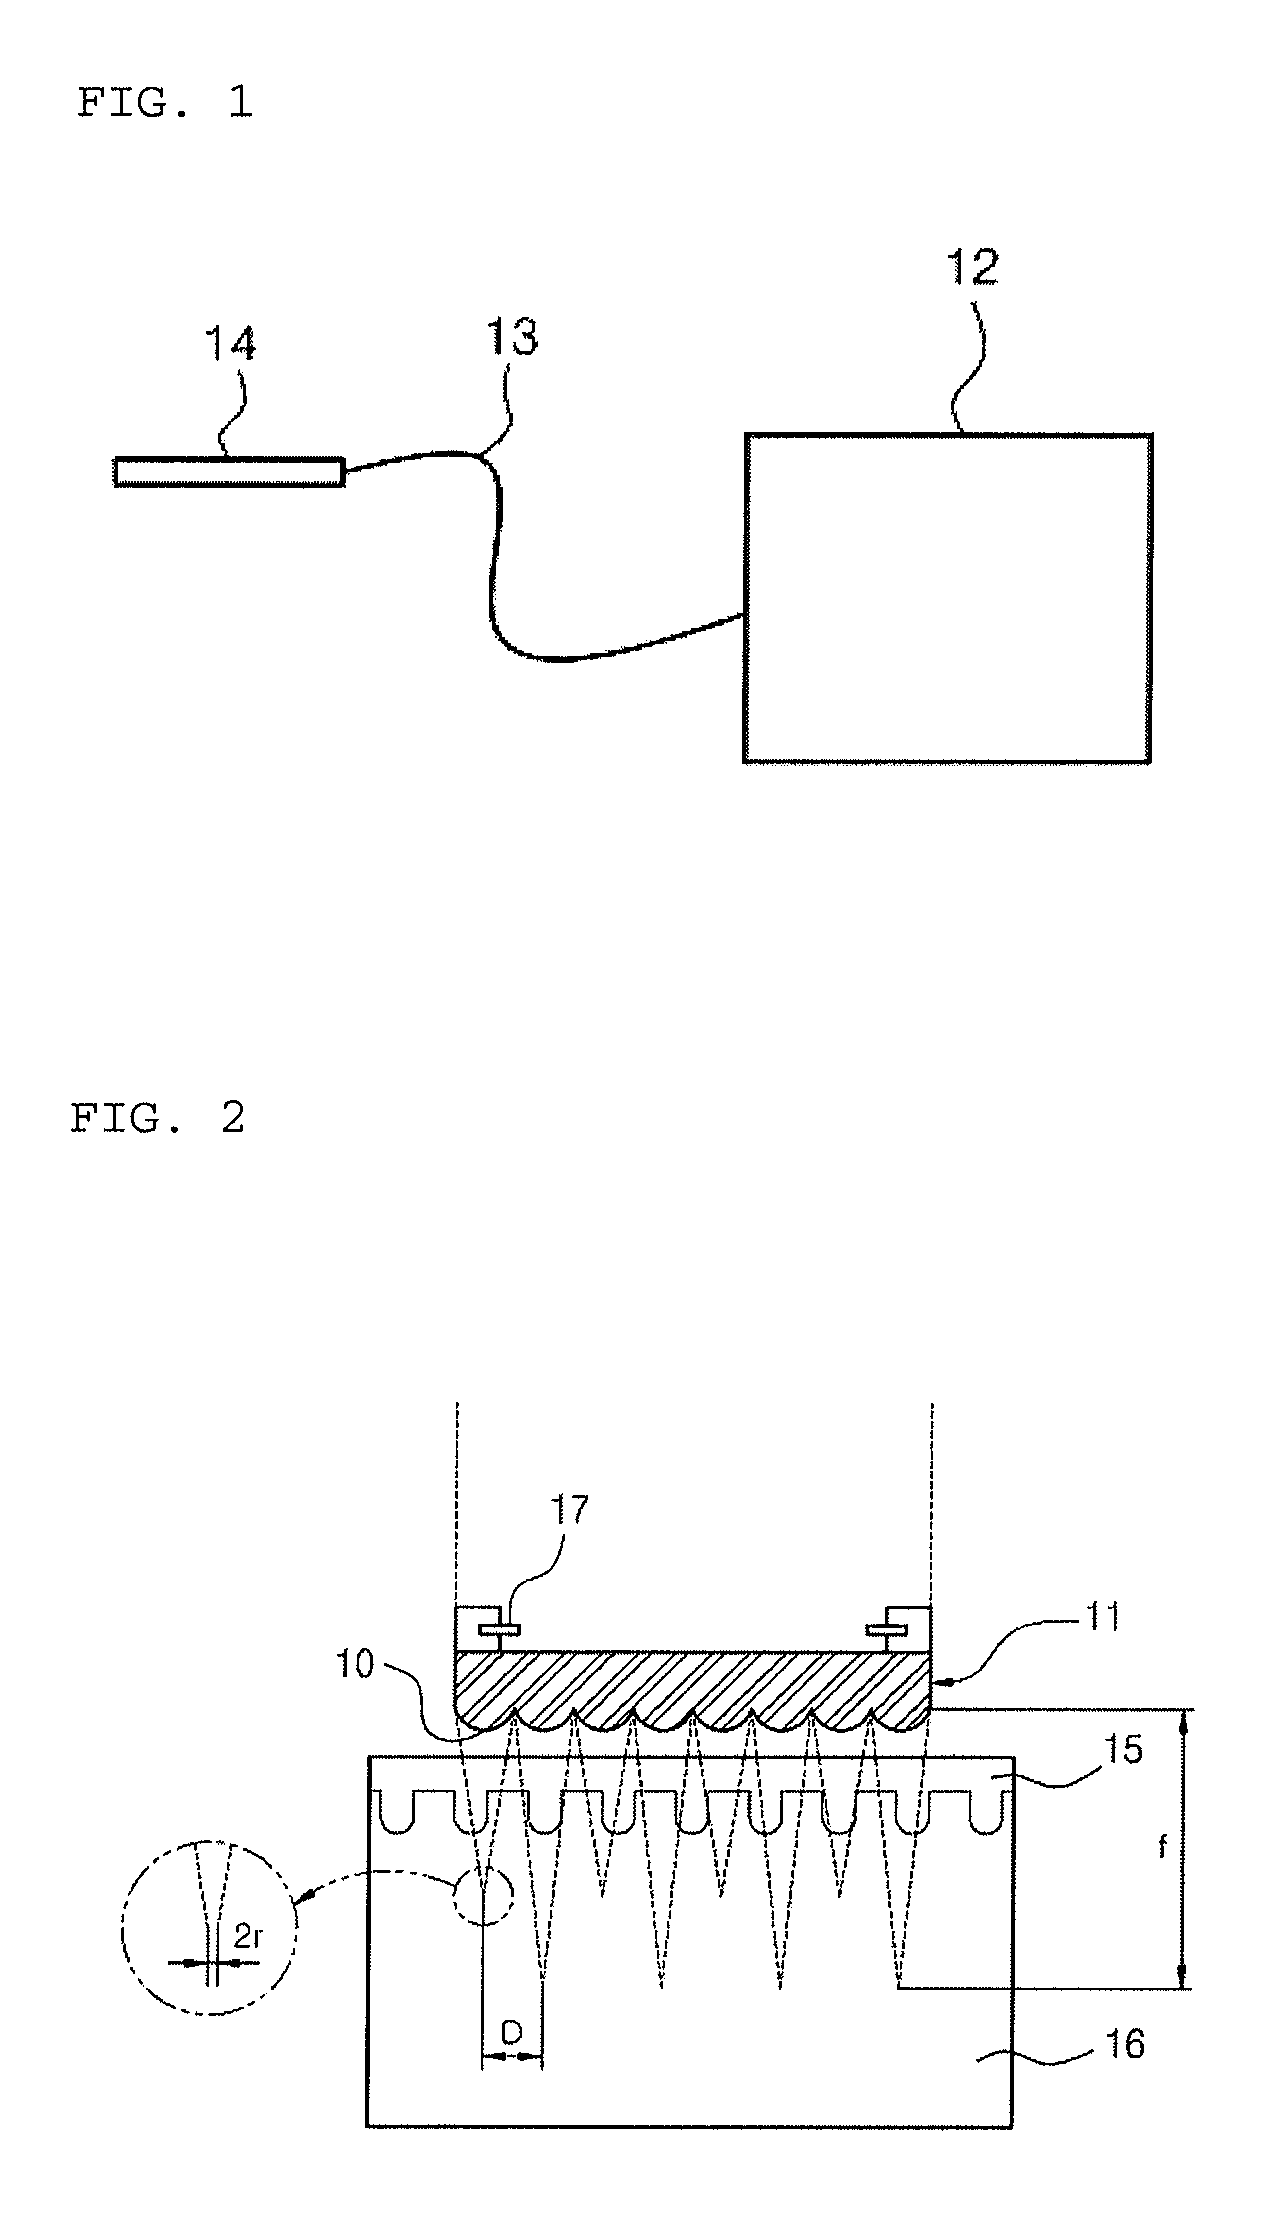 Laser Apparatus for Medical Treatment of Skin Disease